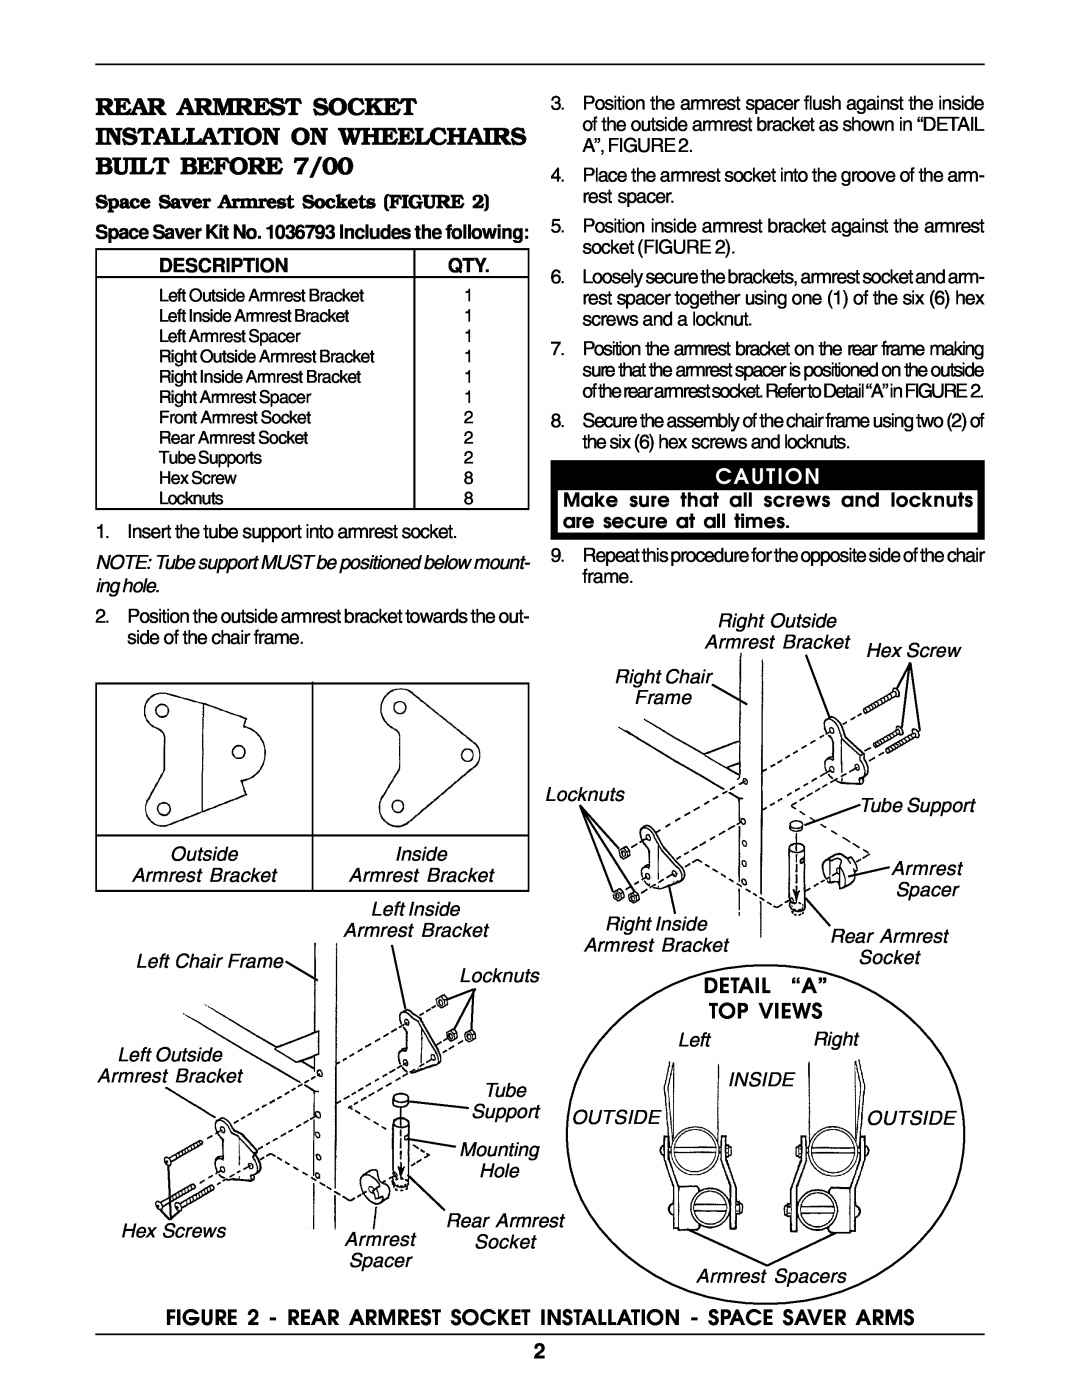 Invacare 1036794 REAR ARMREST SOCKET INSTALLATION ON WHEELCHAIRS BUILT BEFORE 7/00, Detail “A” Top Views, Description 